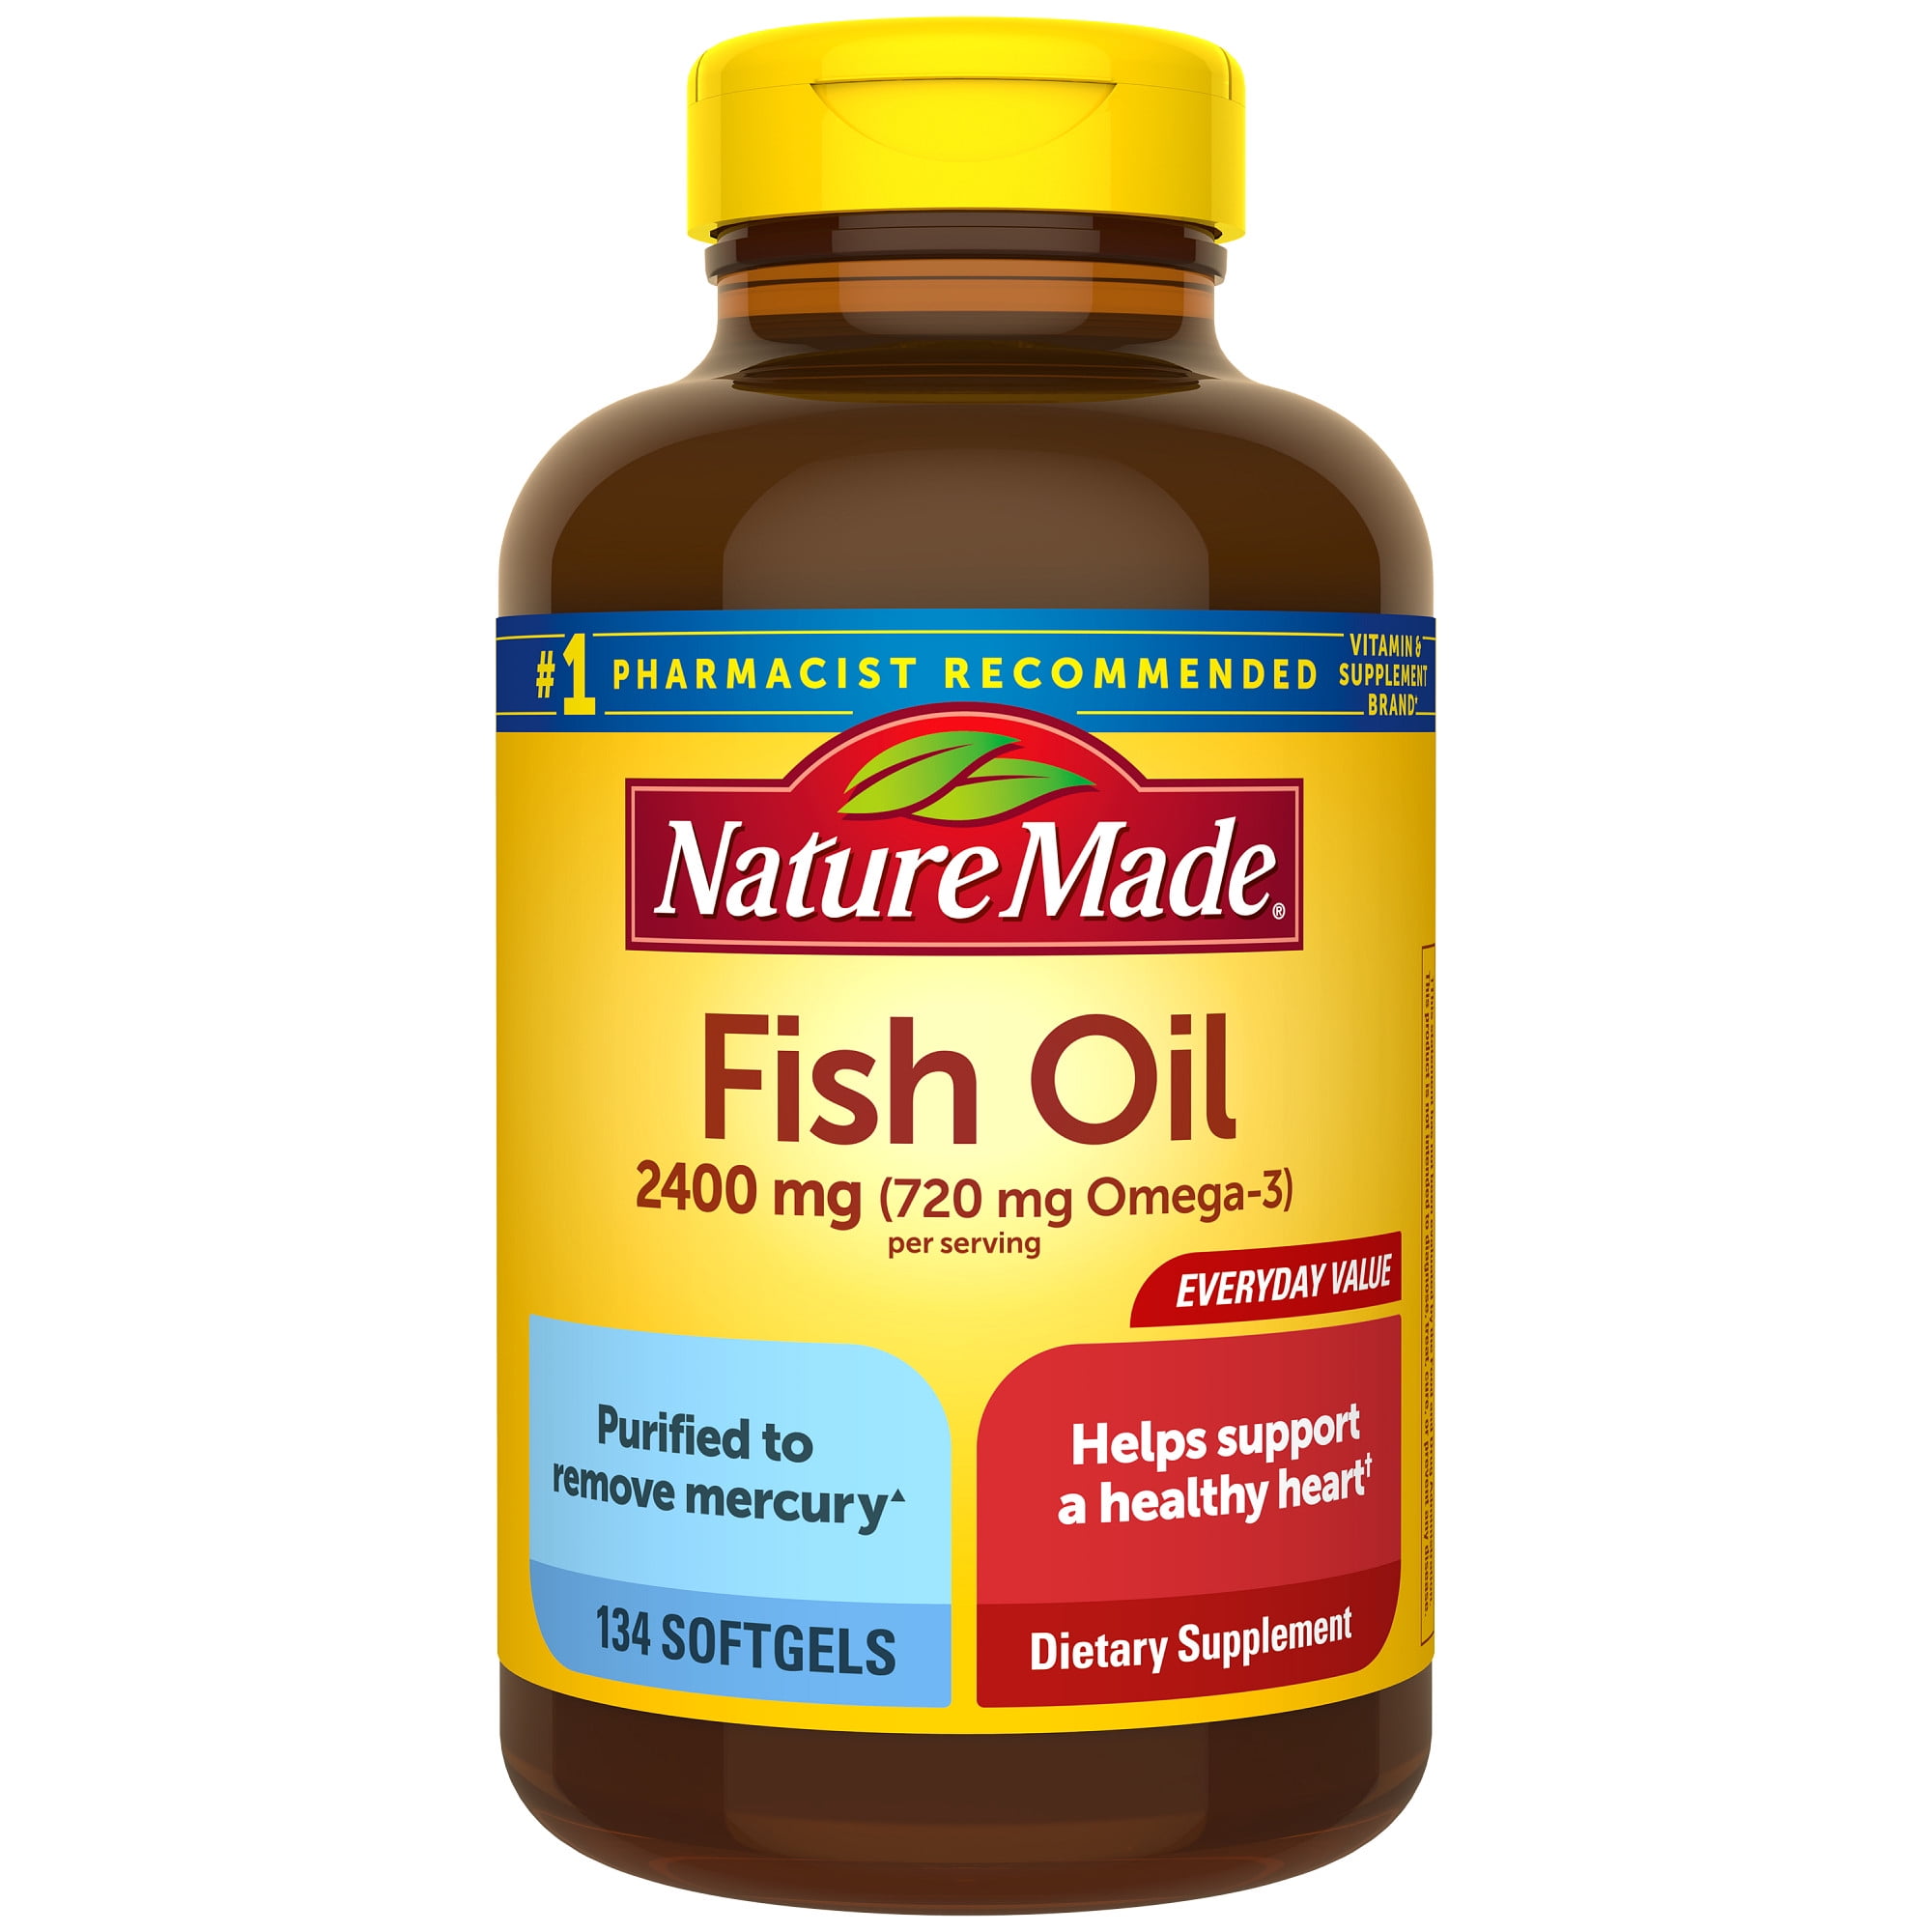 Nature Made Fish Oil 2400mg per Serving Softgels, 134 Count Value Size